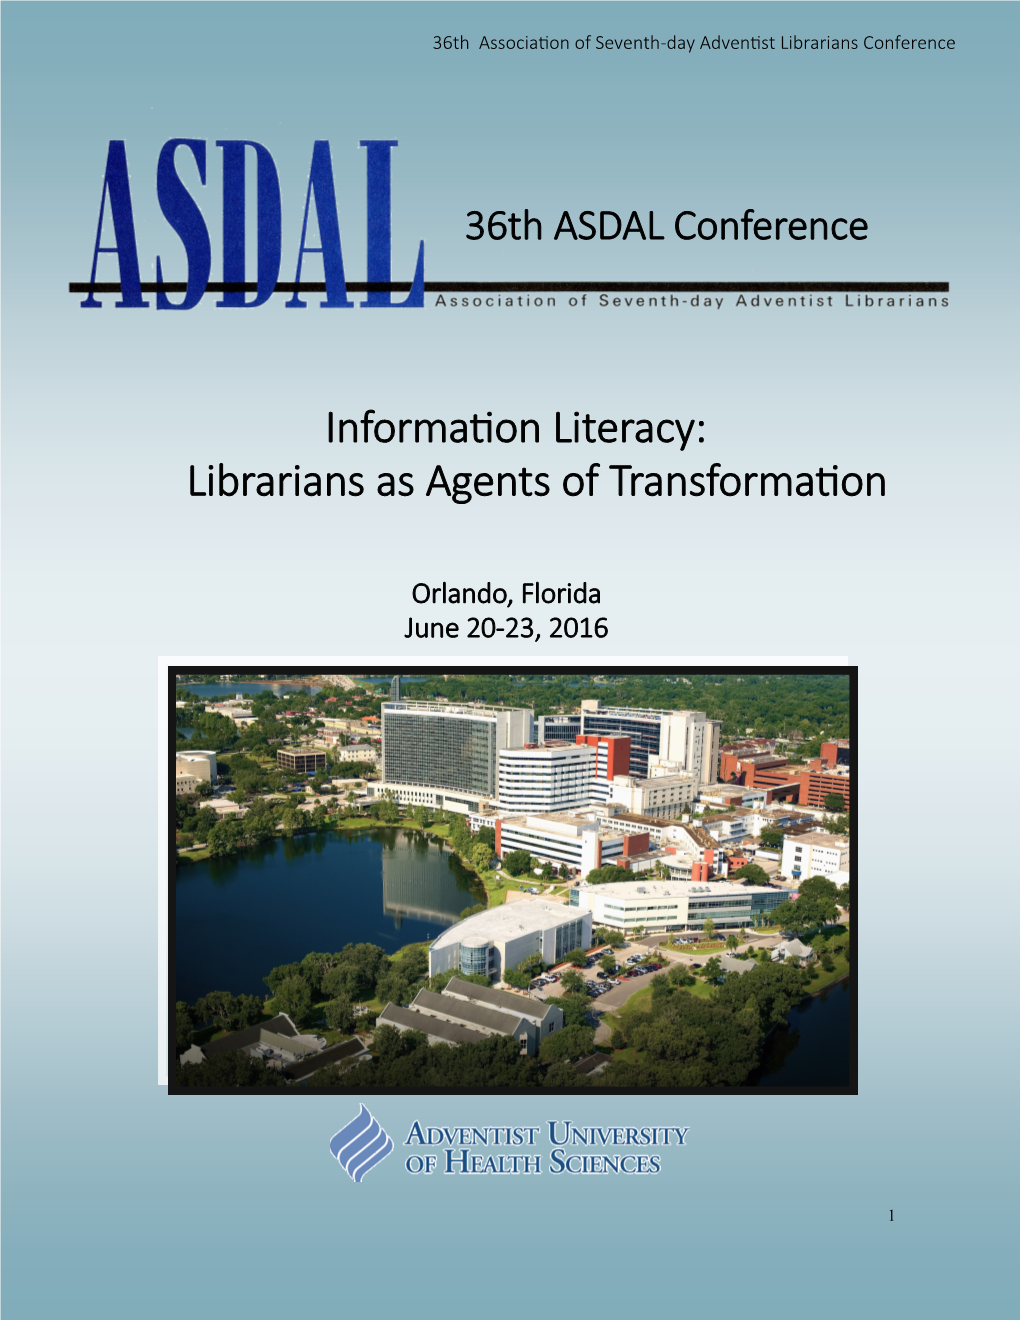 Librarians As Agents of Transformation